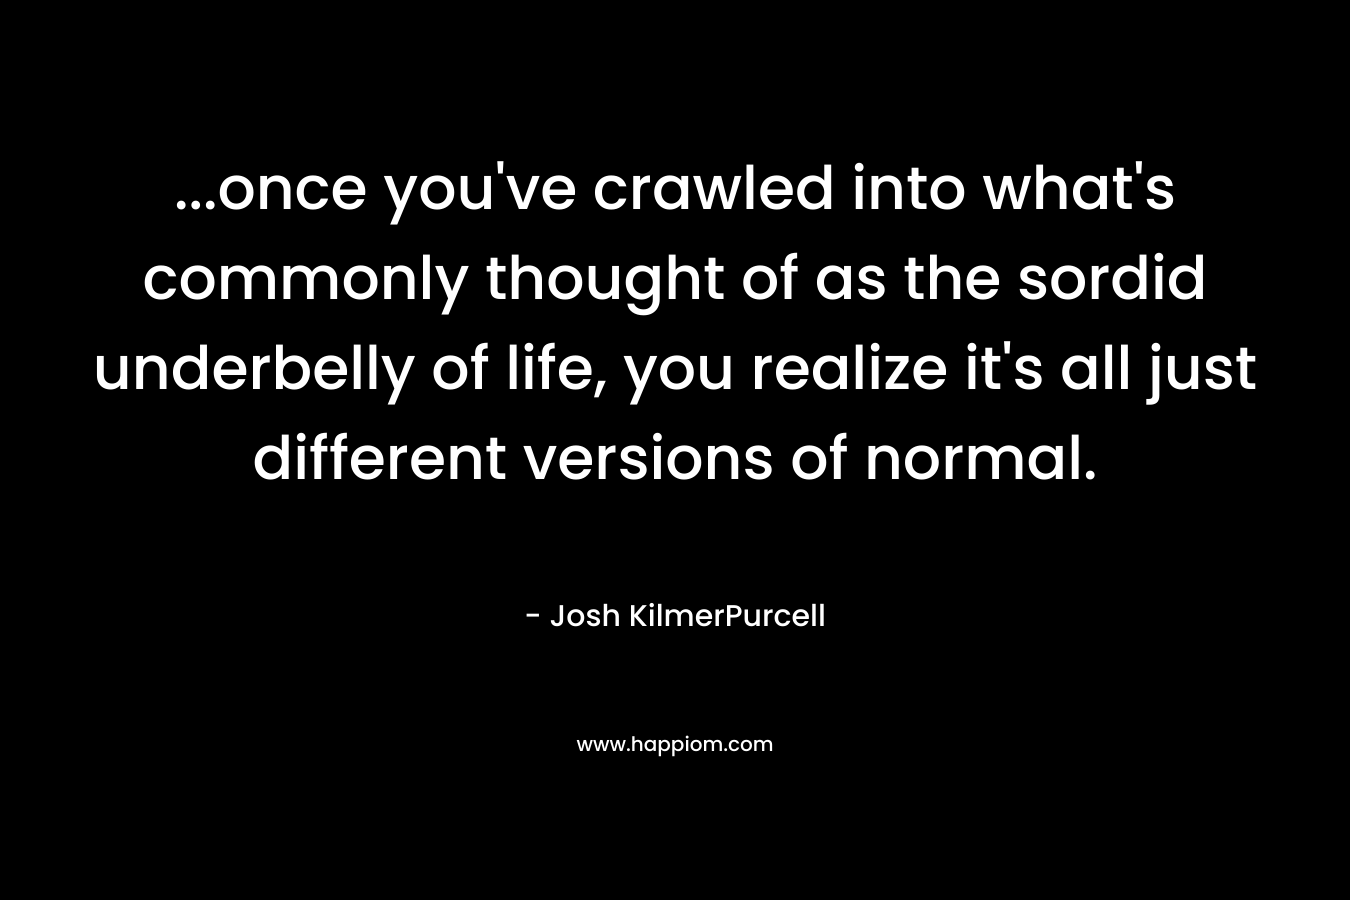 ...once you've crawled into what's commonly thought of as the sordid underbelly of life, you realize it's all just different versions of normal.